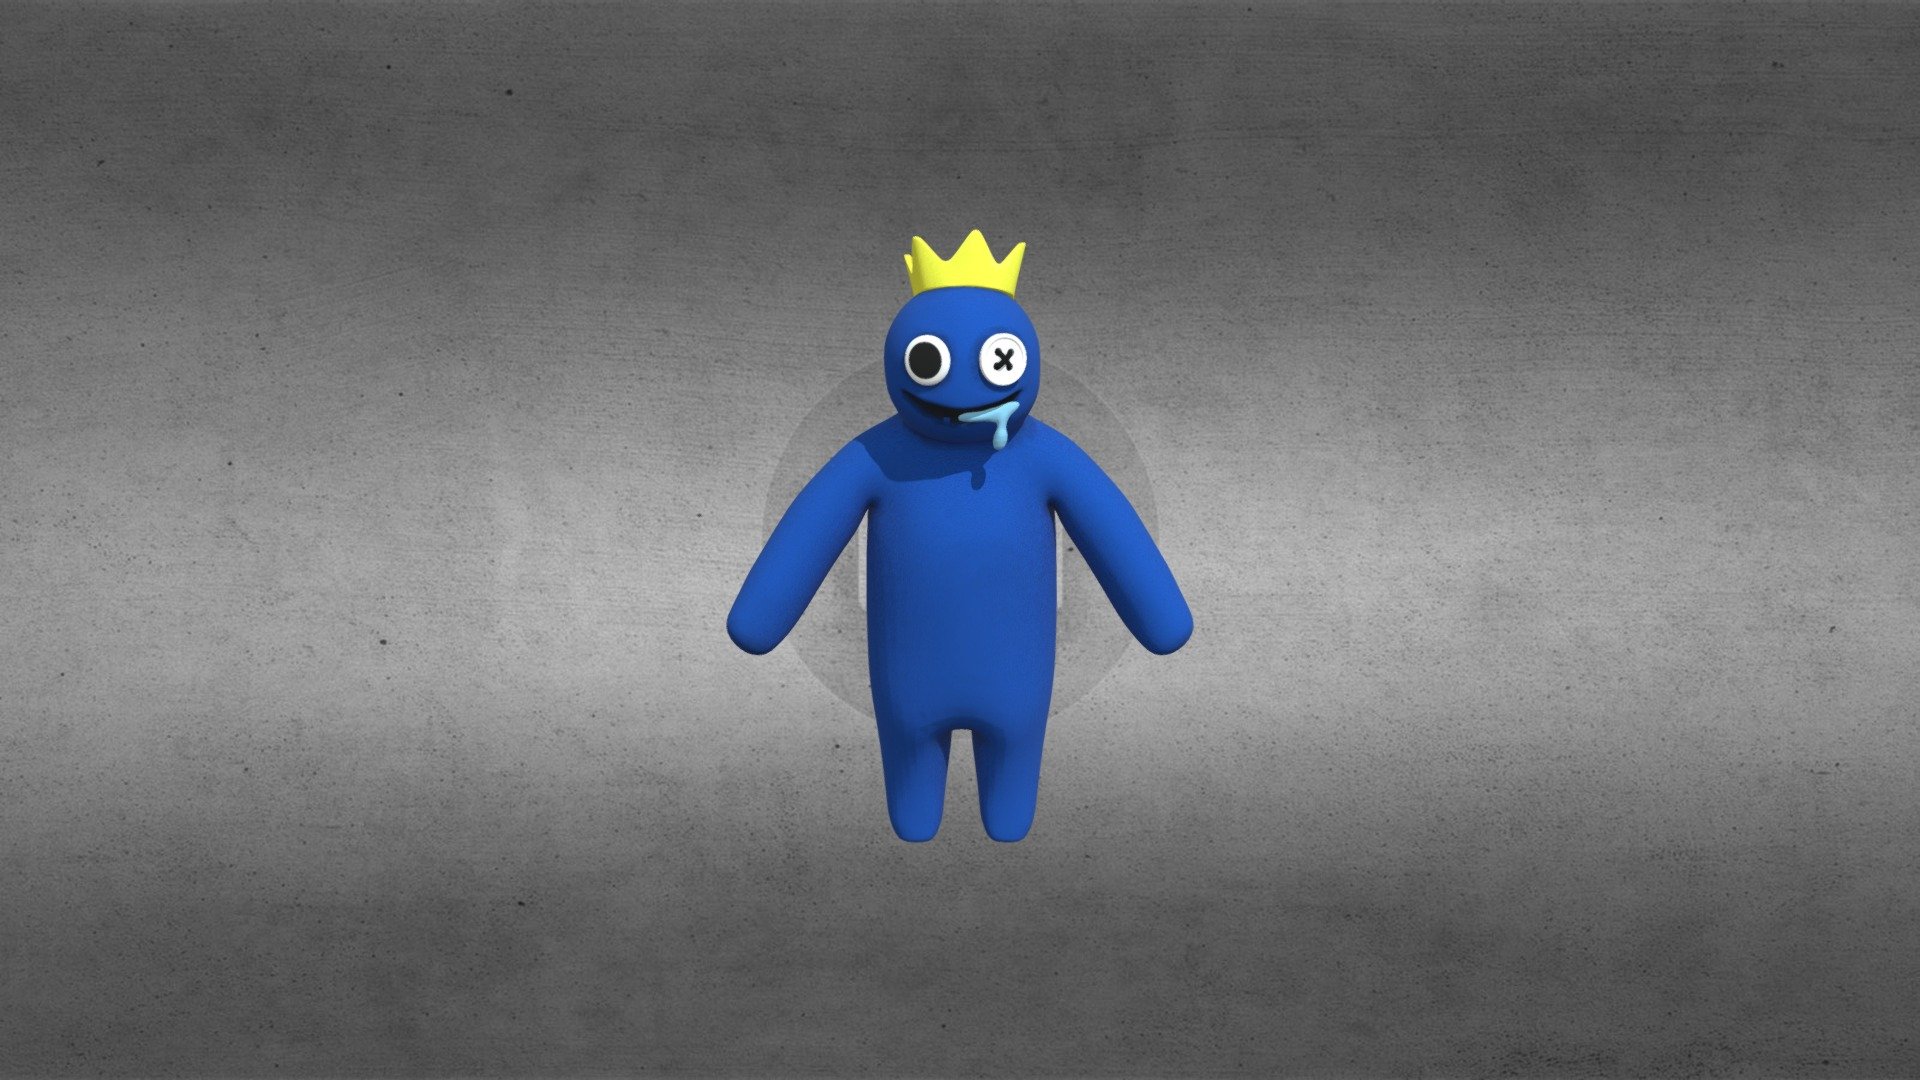 Blue from rainbow friends (rigged) - Download Free 3D model by yes